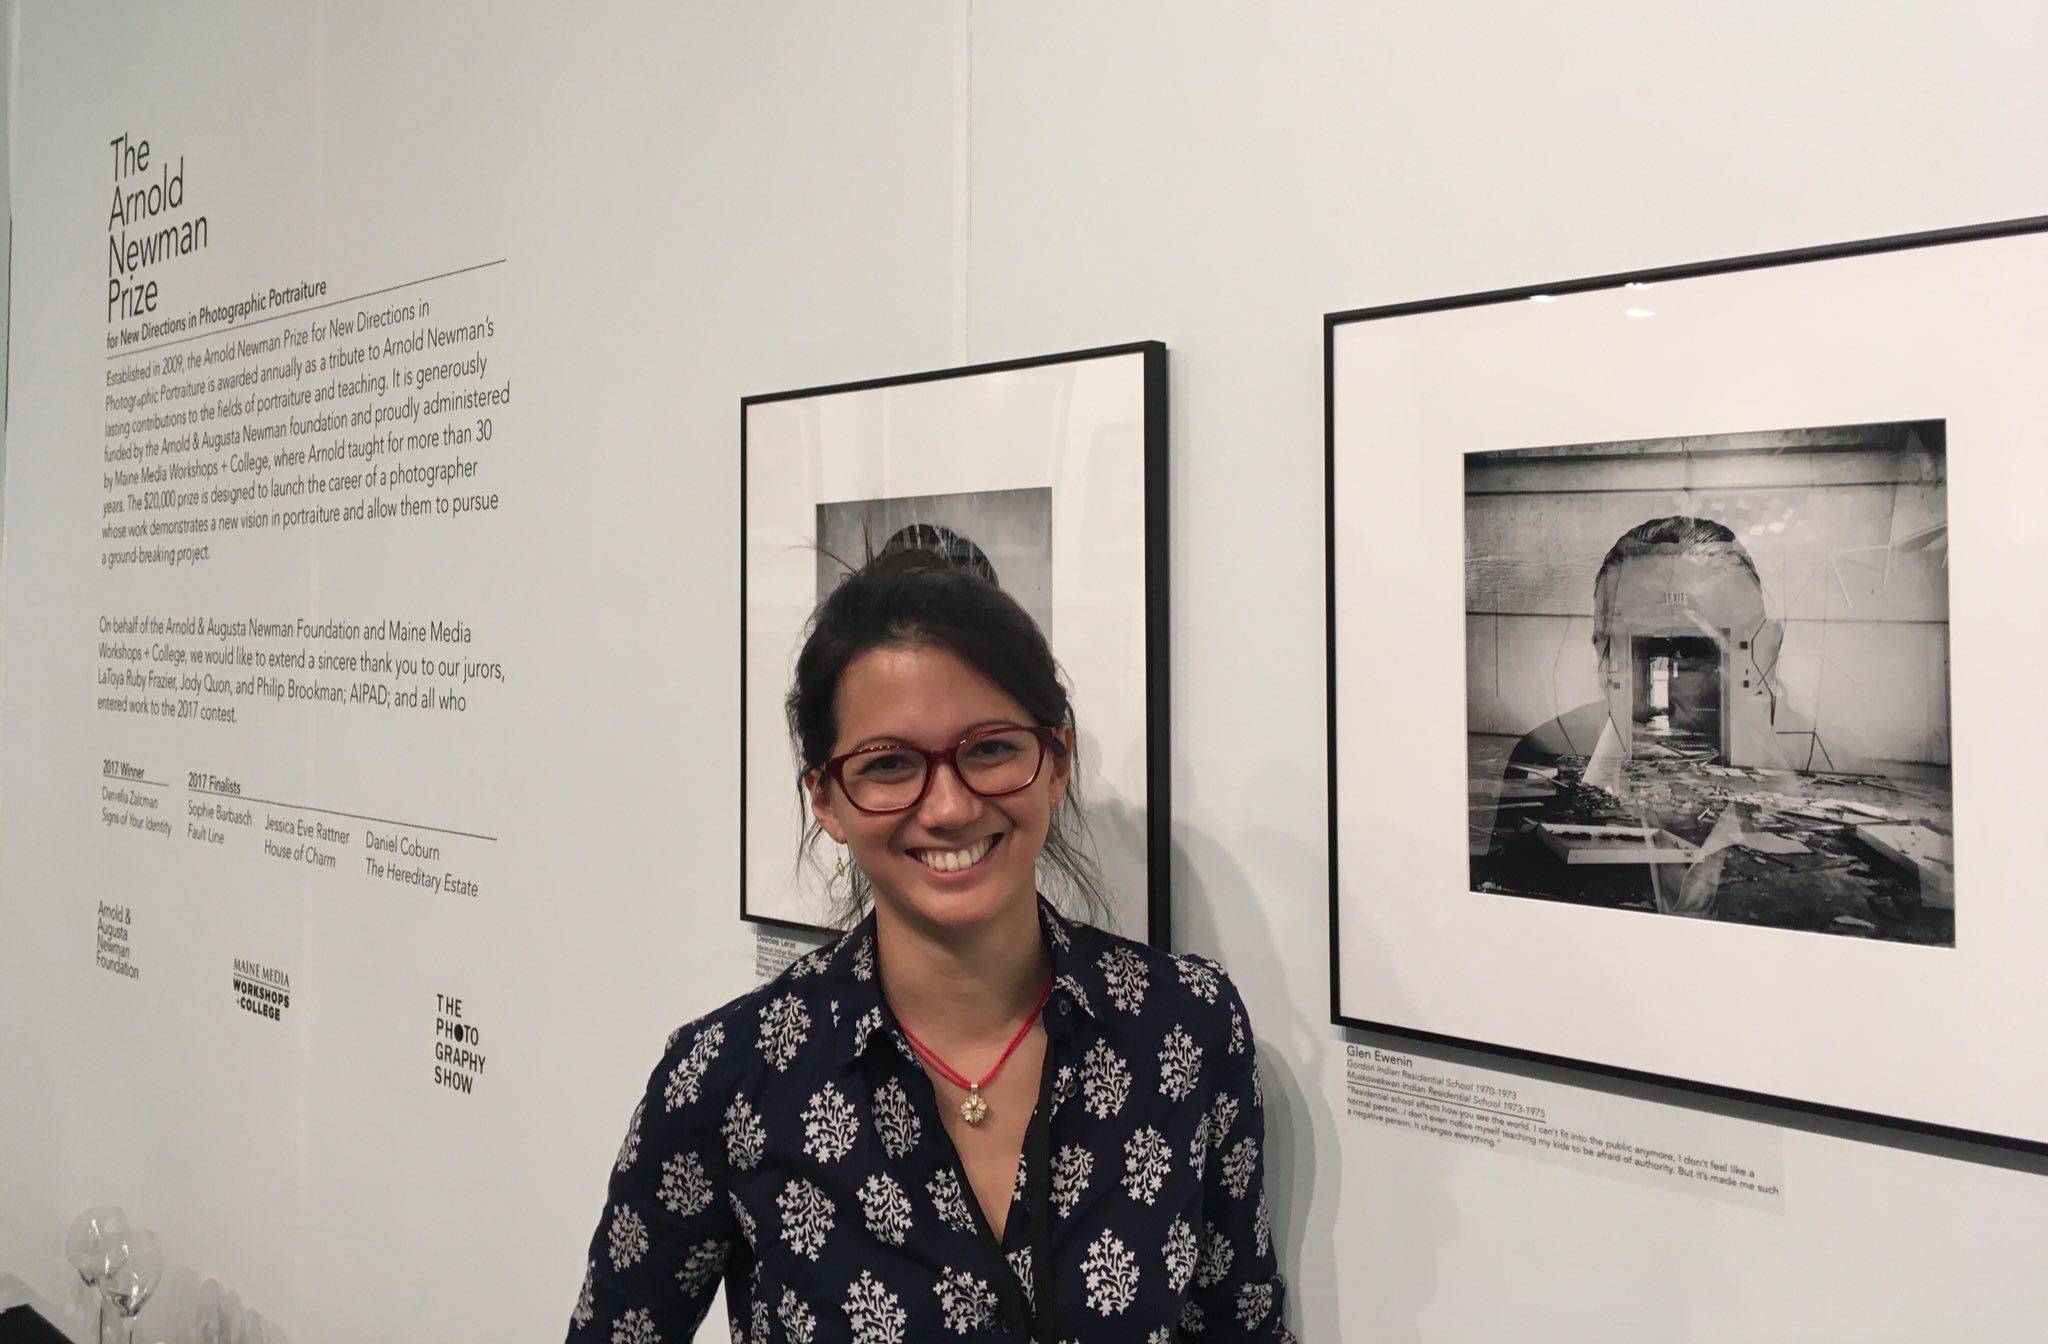 Daniella Zalcman at an exhibition of her work honoring her for winning the Arnold Newman Prize. Image courtesy of Daniella Zalcman. United States, 2017. 